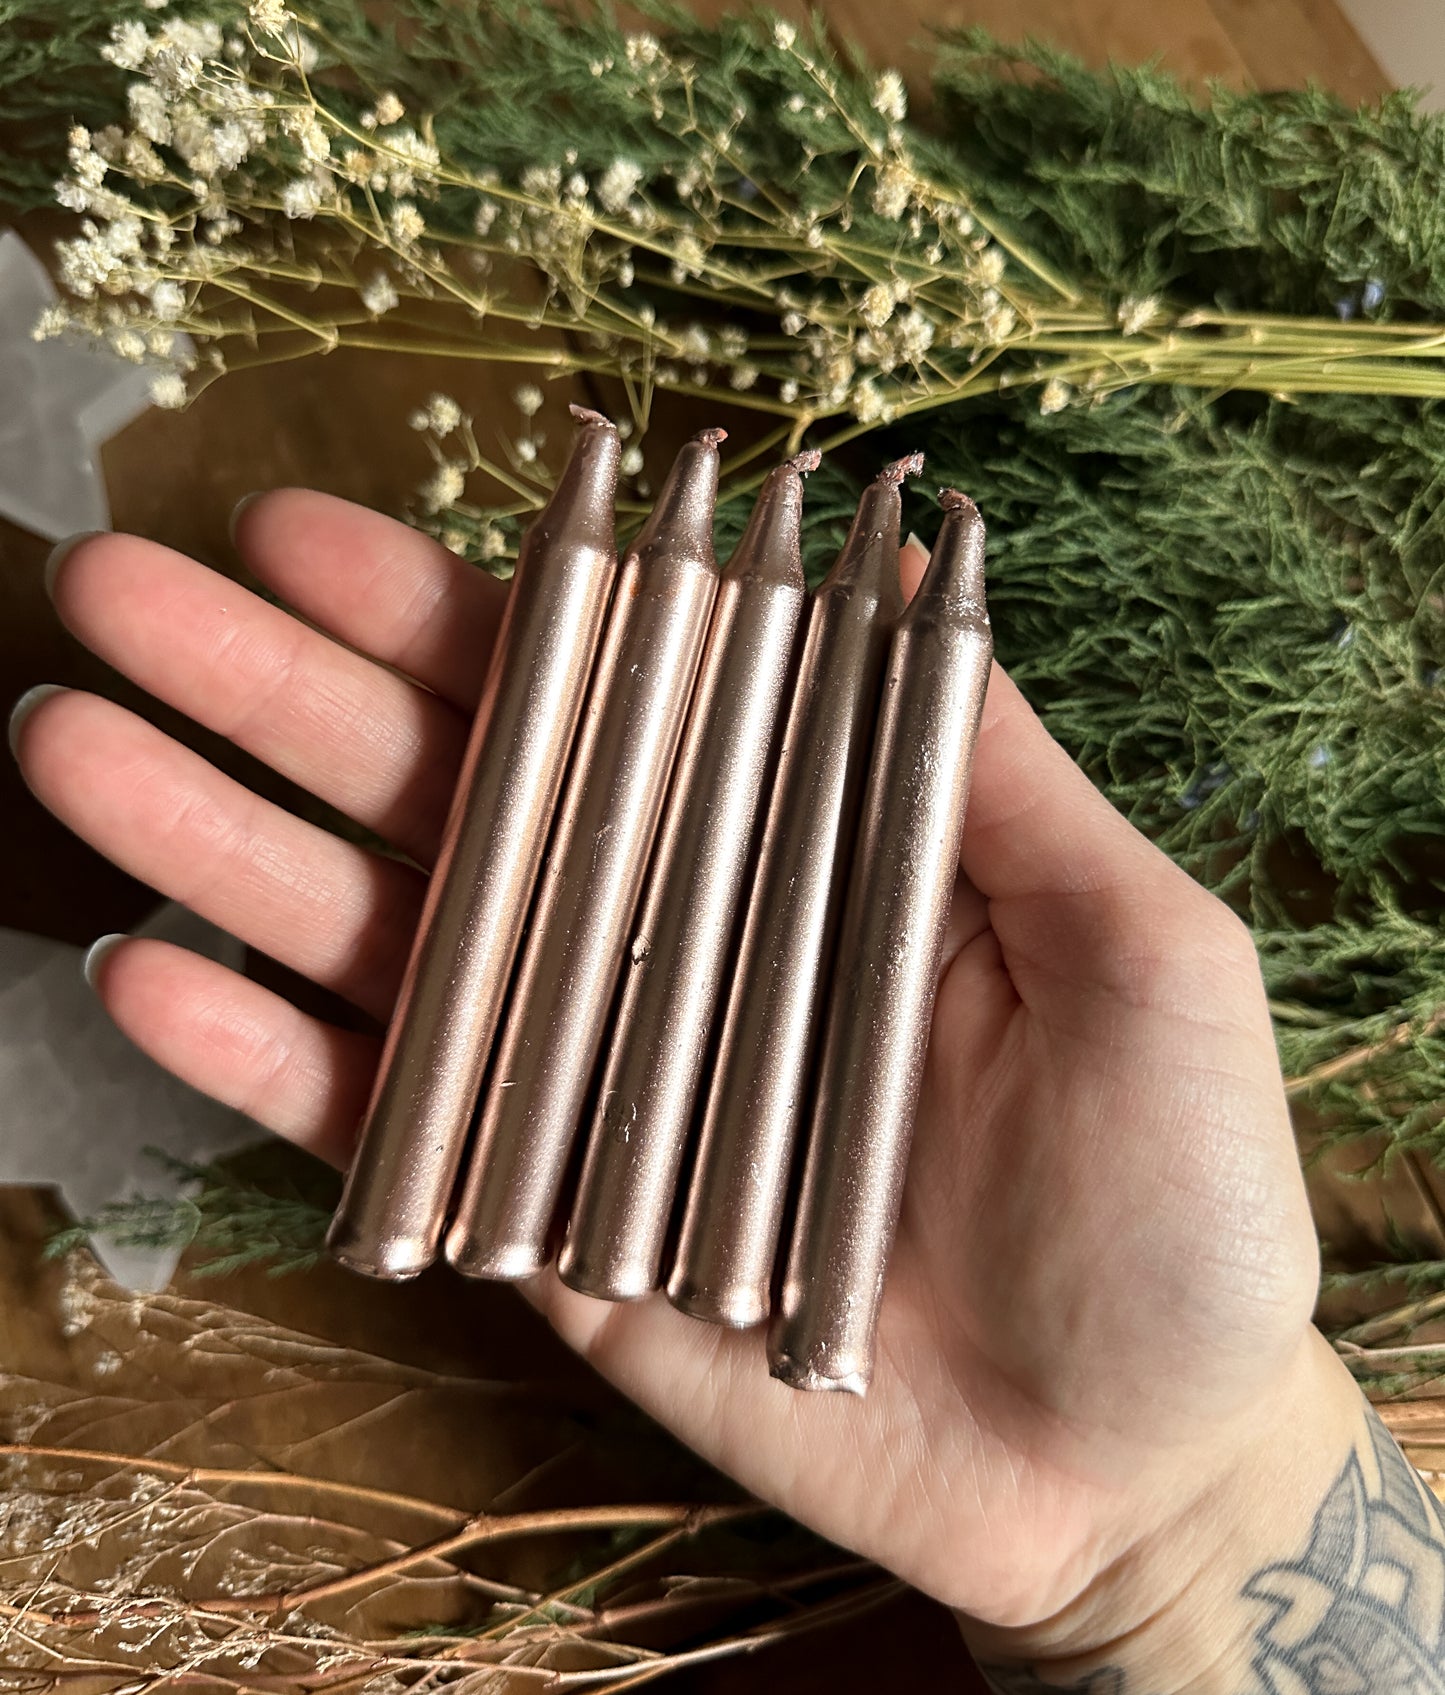 Copper Spell Candles - 4" Chime Candles